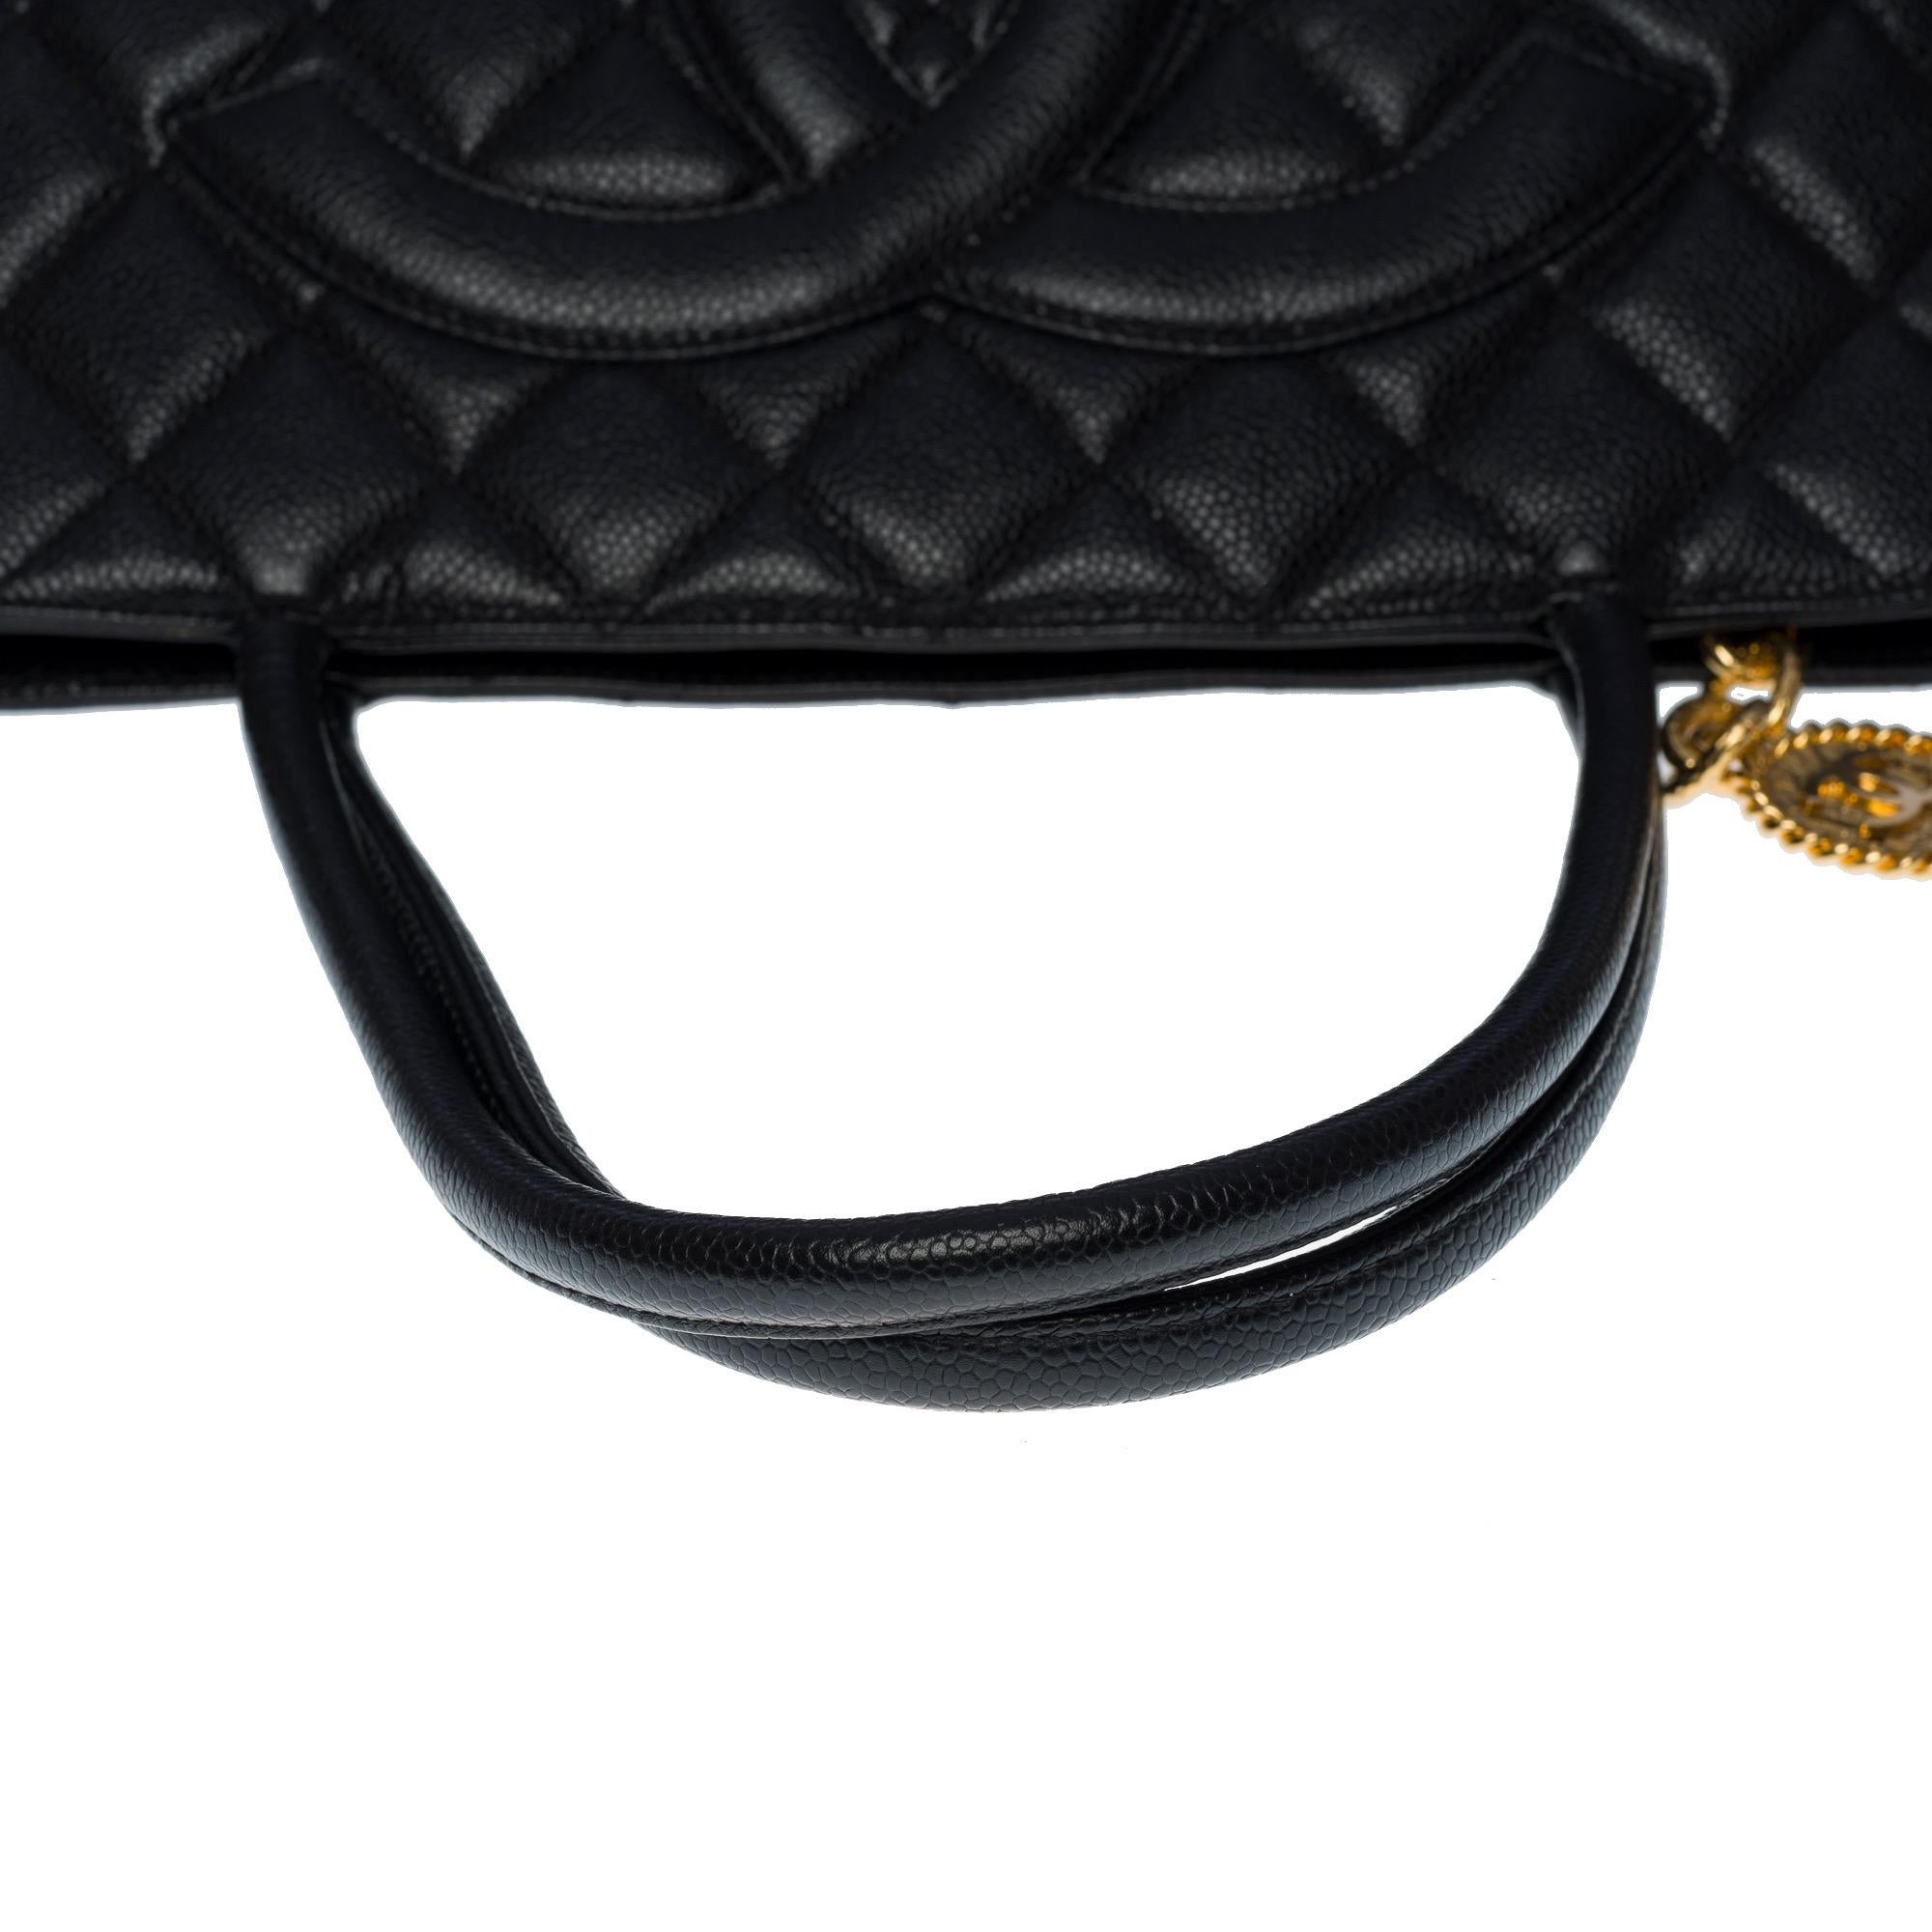 Beautiful Chanel Medaillon Tote bag in black caviar leather, GHW For Sale 4